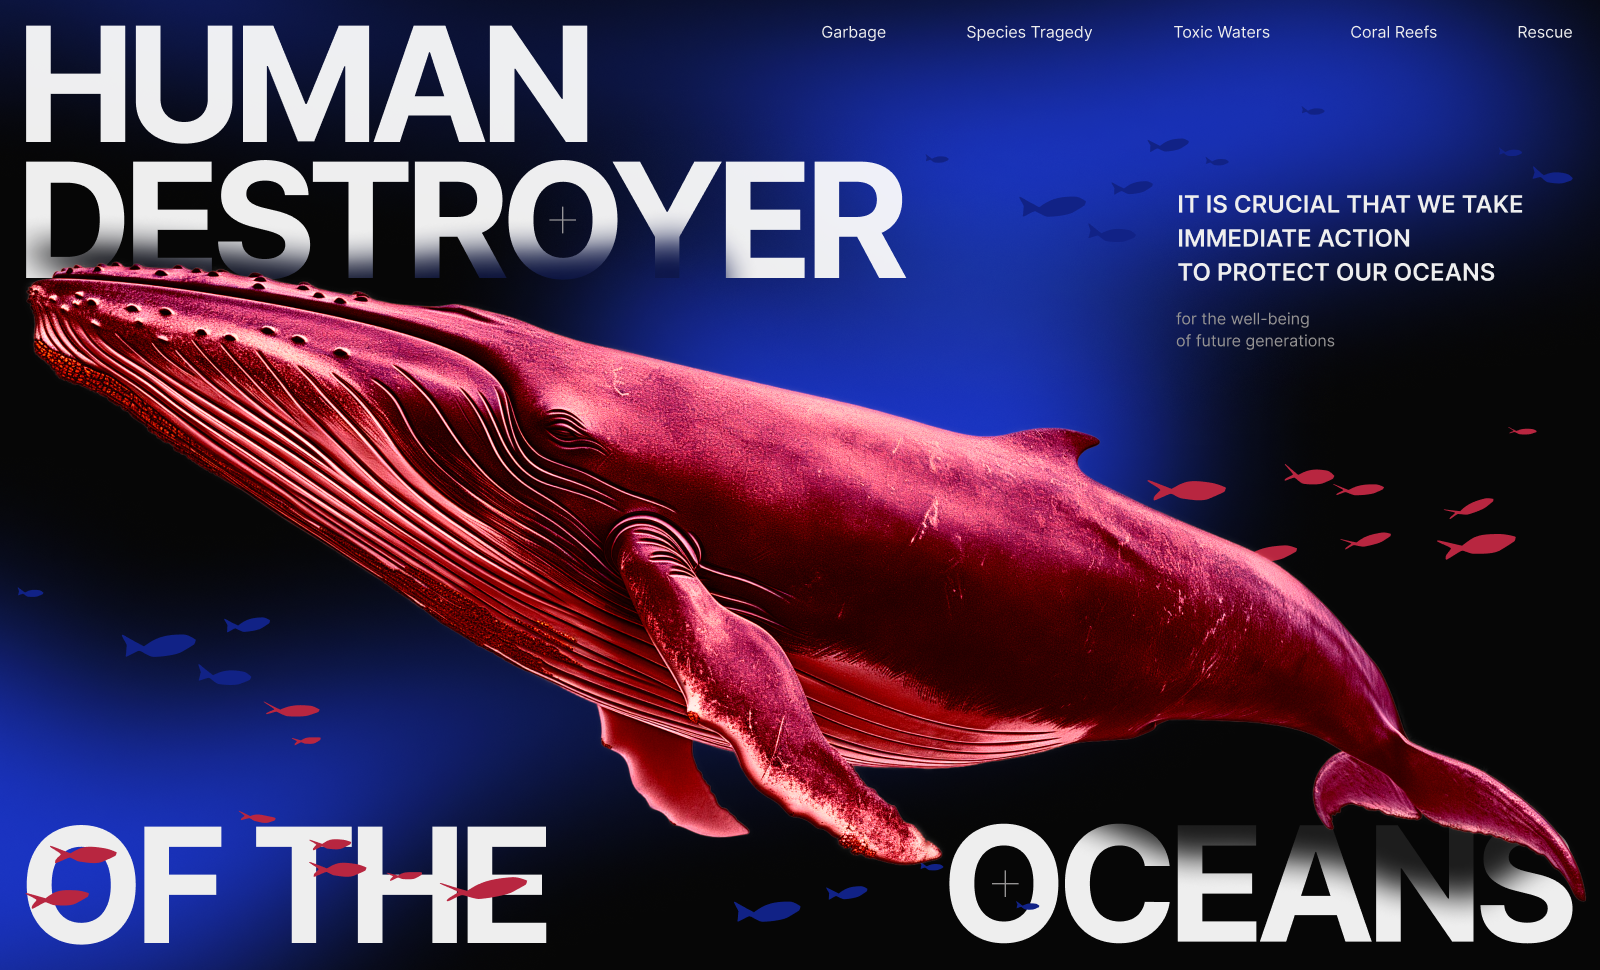 Human destroyer of the oceans